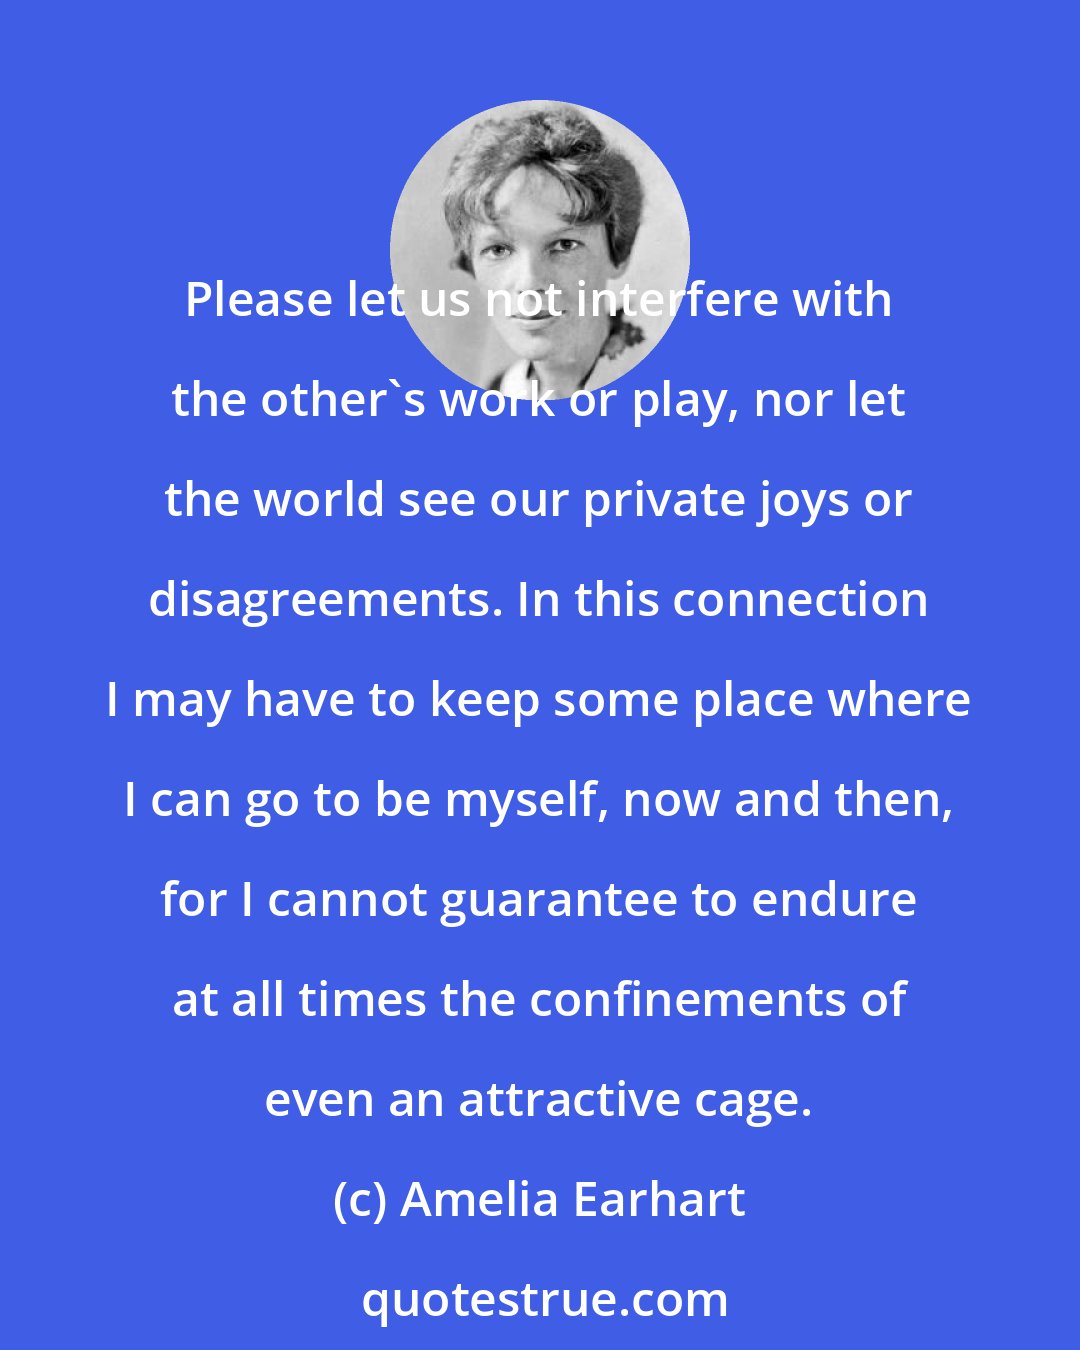 Amelia Earhart: Please let us not interfere with the other's work or play, nor let the world see our private joys or disagreements. In this connection I may have to keep some place where I can go to be myself, now and then, for I cannot guarantee to endure at all times the confinements of even an attractive cage.